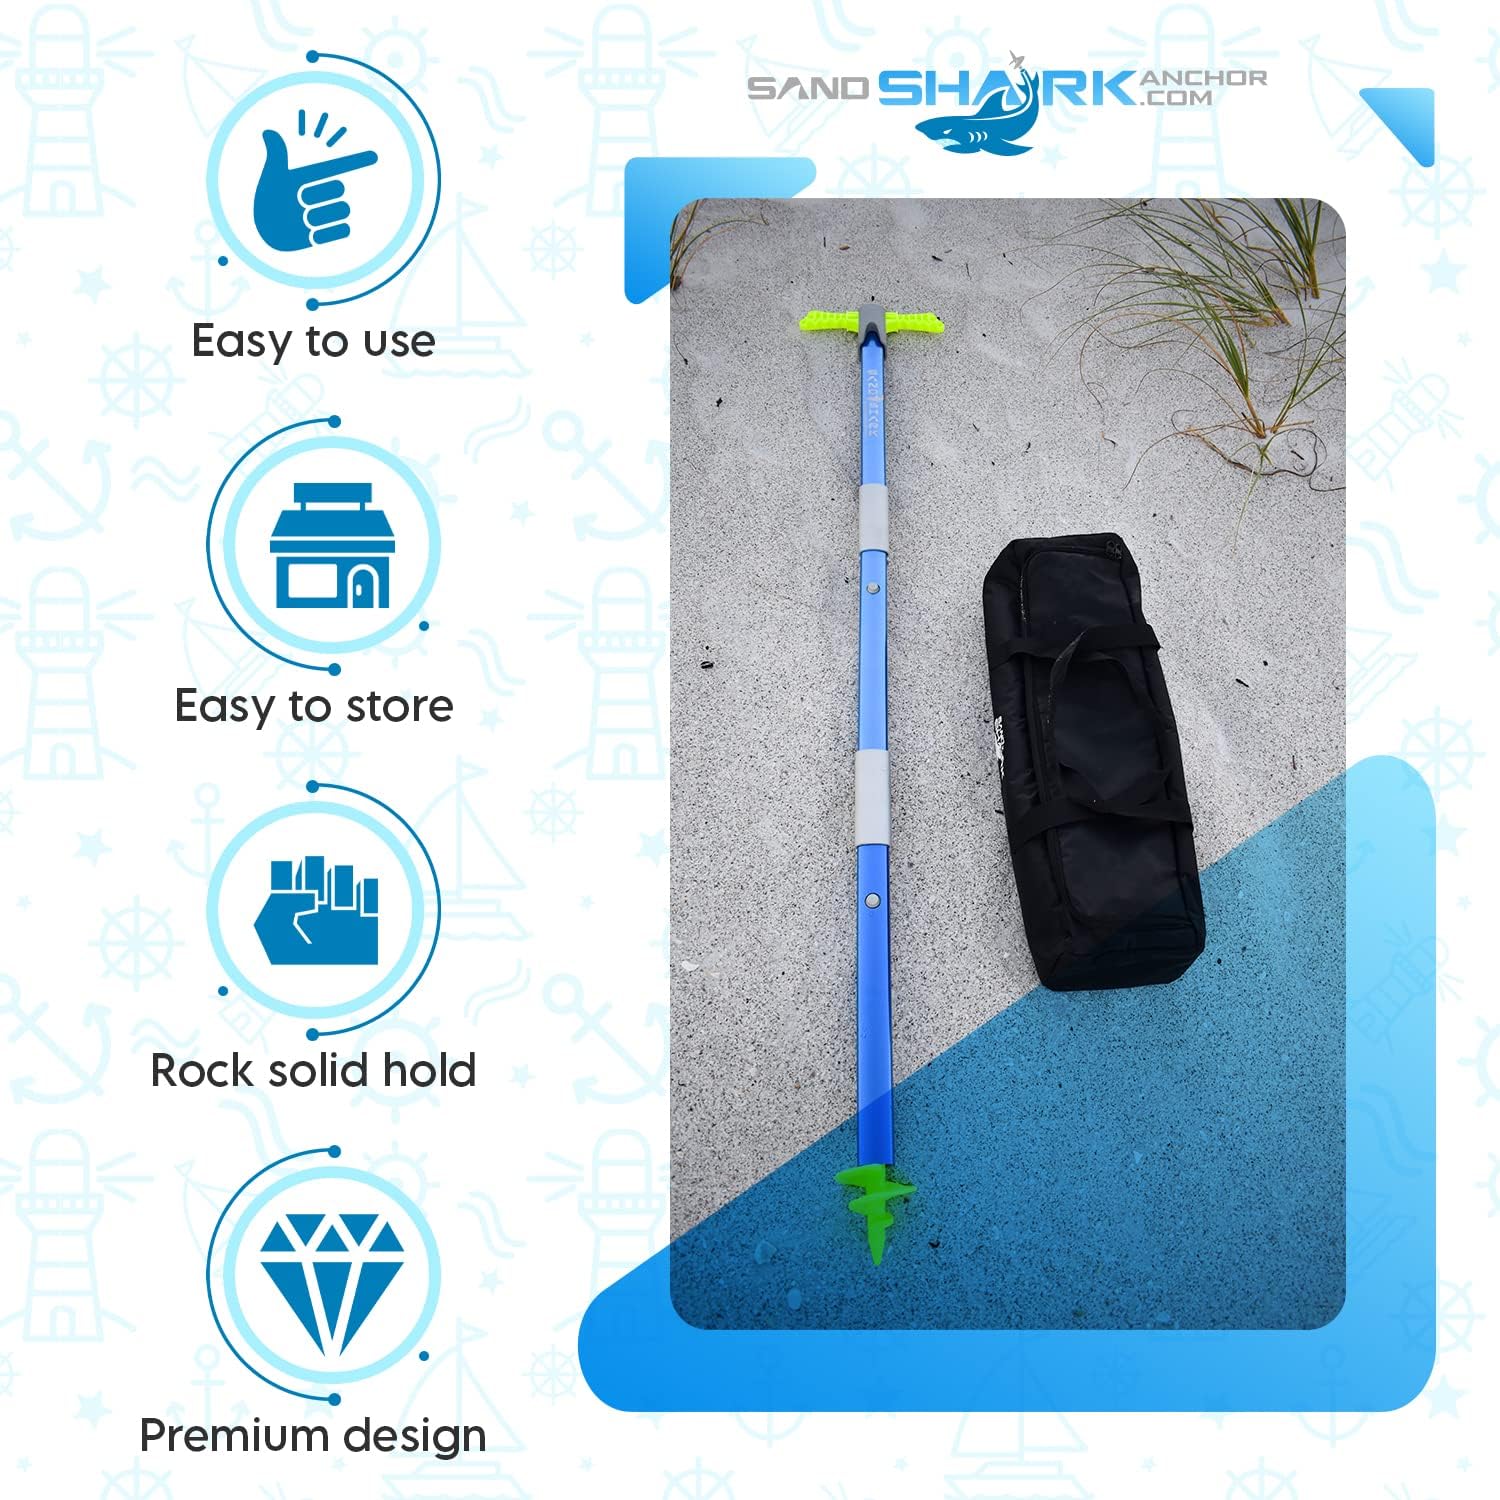 SandShark New MEGA-SPORT Boat Anchor. Boat Anchor Kit w/Rip-Stop Padded Case, Easy to Adjust. Shallow Water Anchor Pole for Boat. Must Have Pontoon Boat Accessories, Converts from 4ft to 5ft 8in